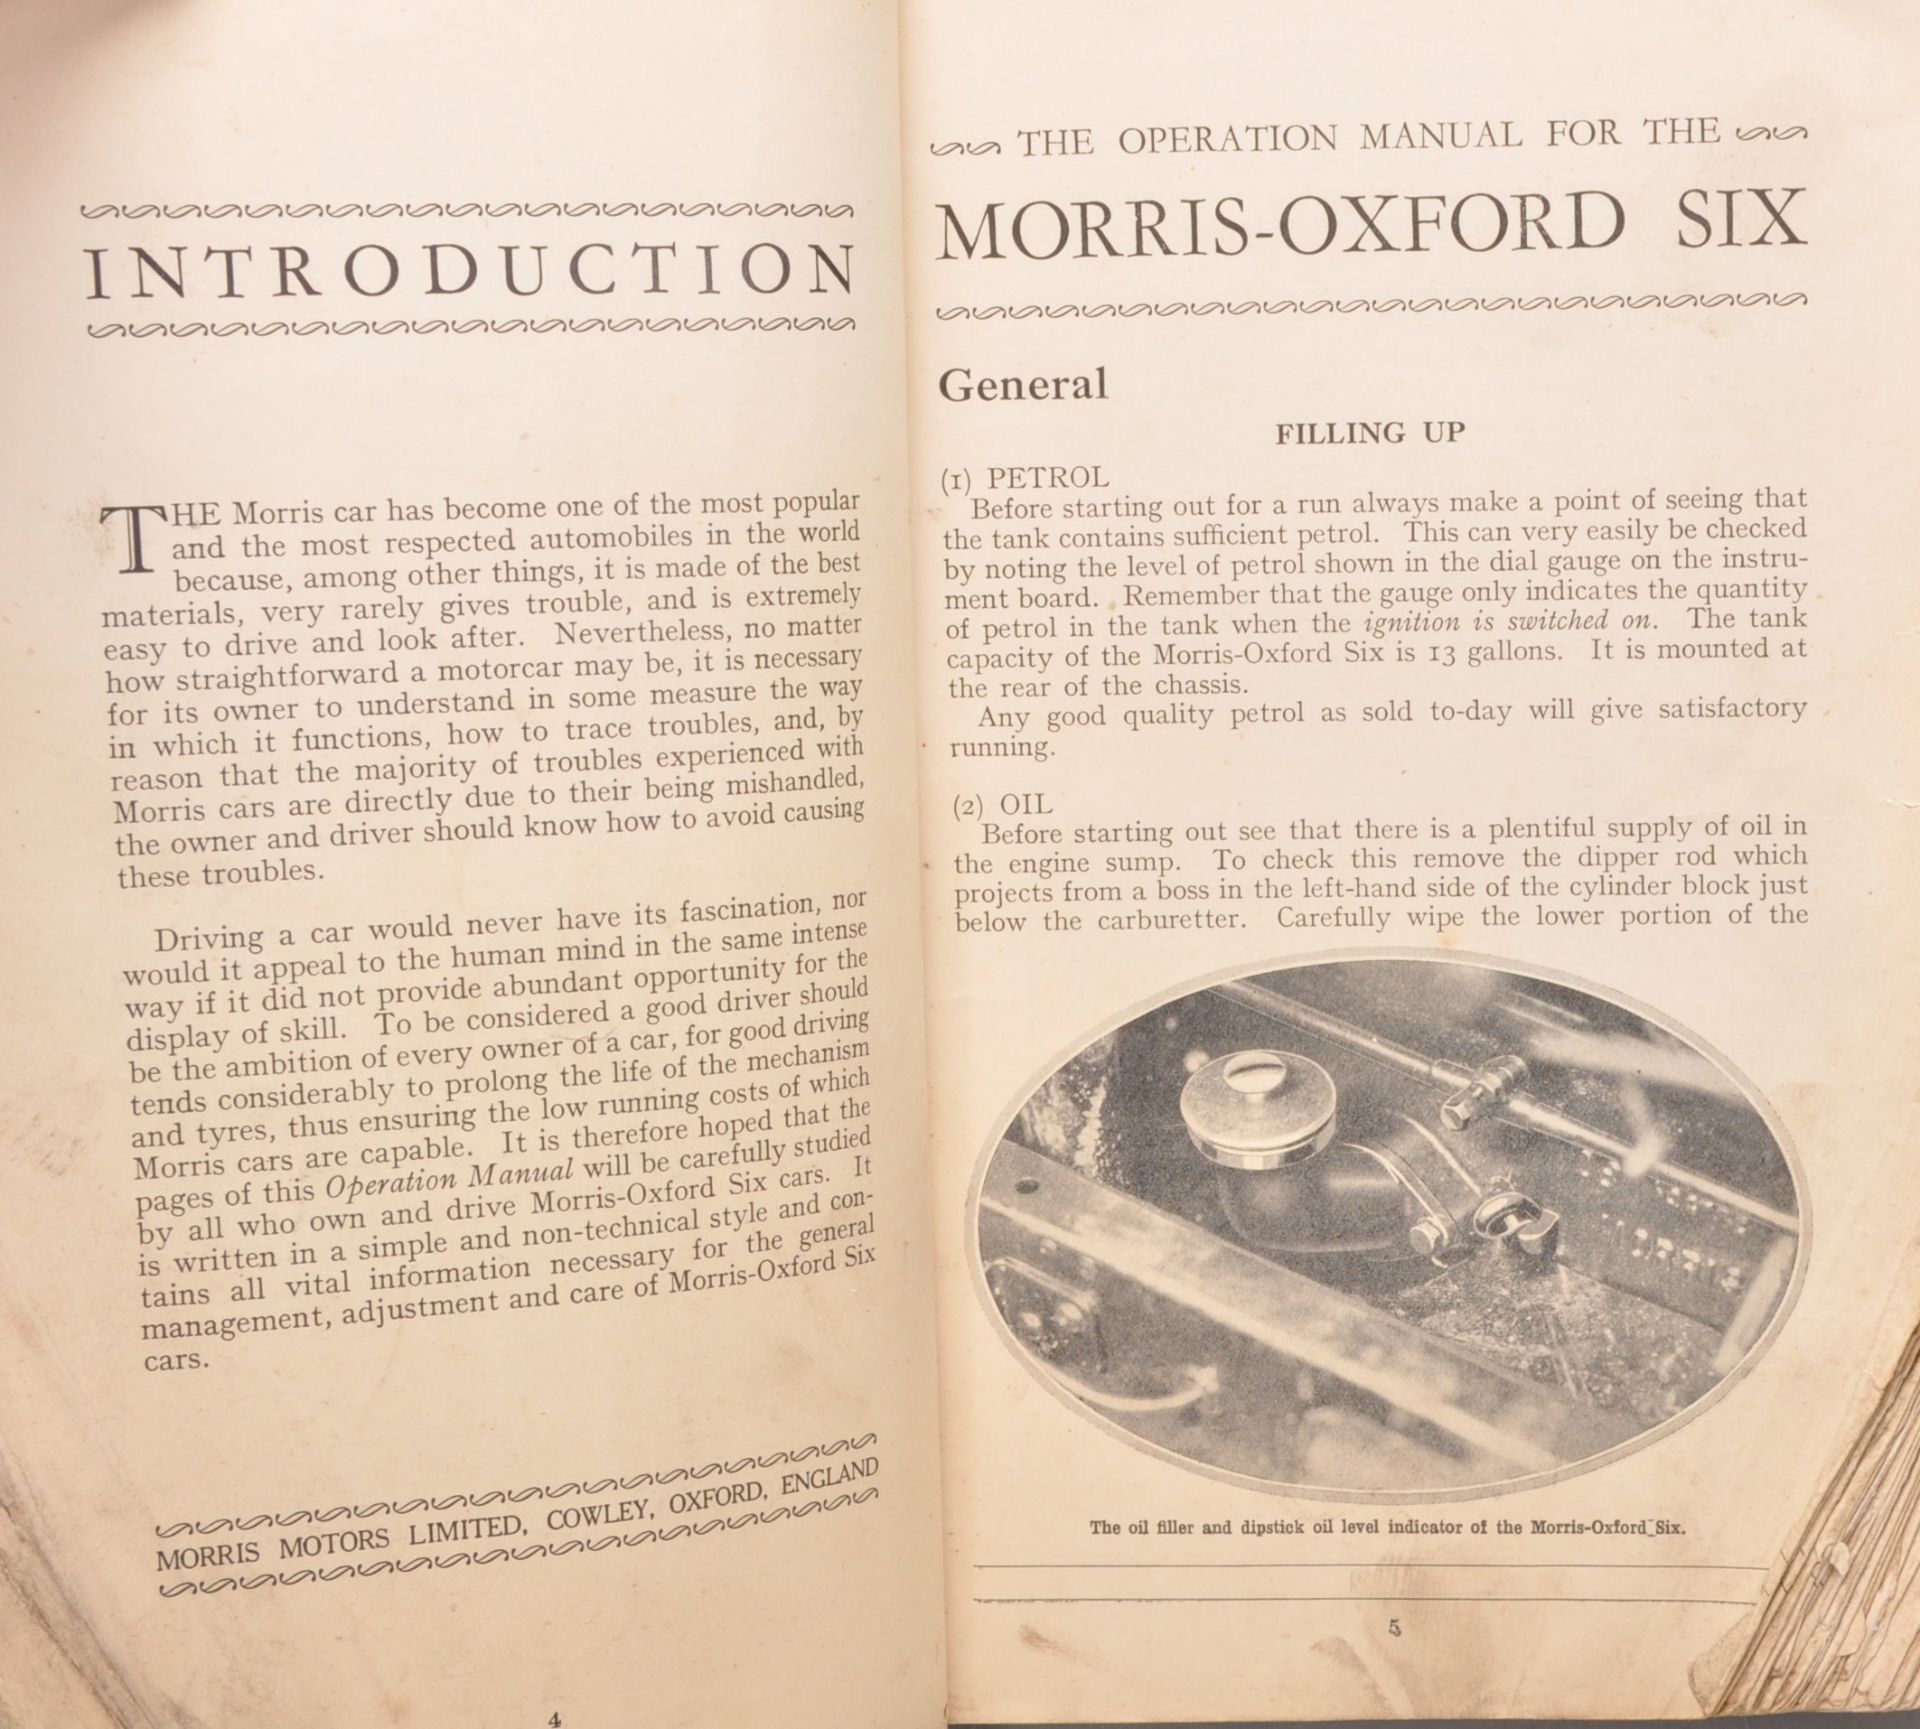 Motoring - A Operation Manual for a Morris-Oxford Six. 1933 edition. - Bild 4 aus 4